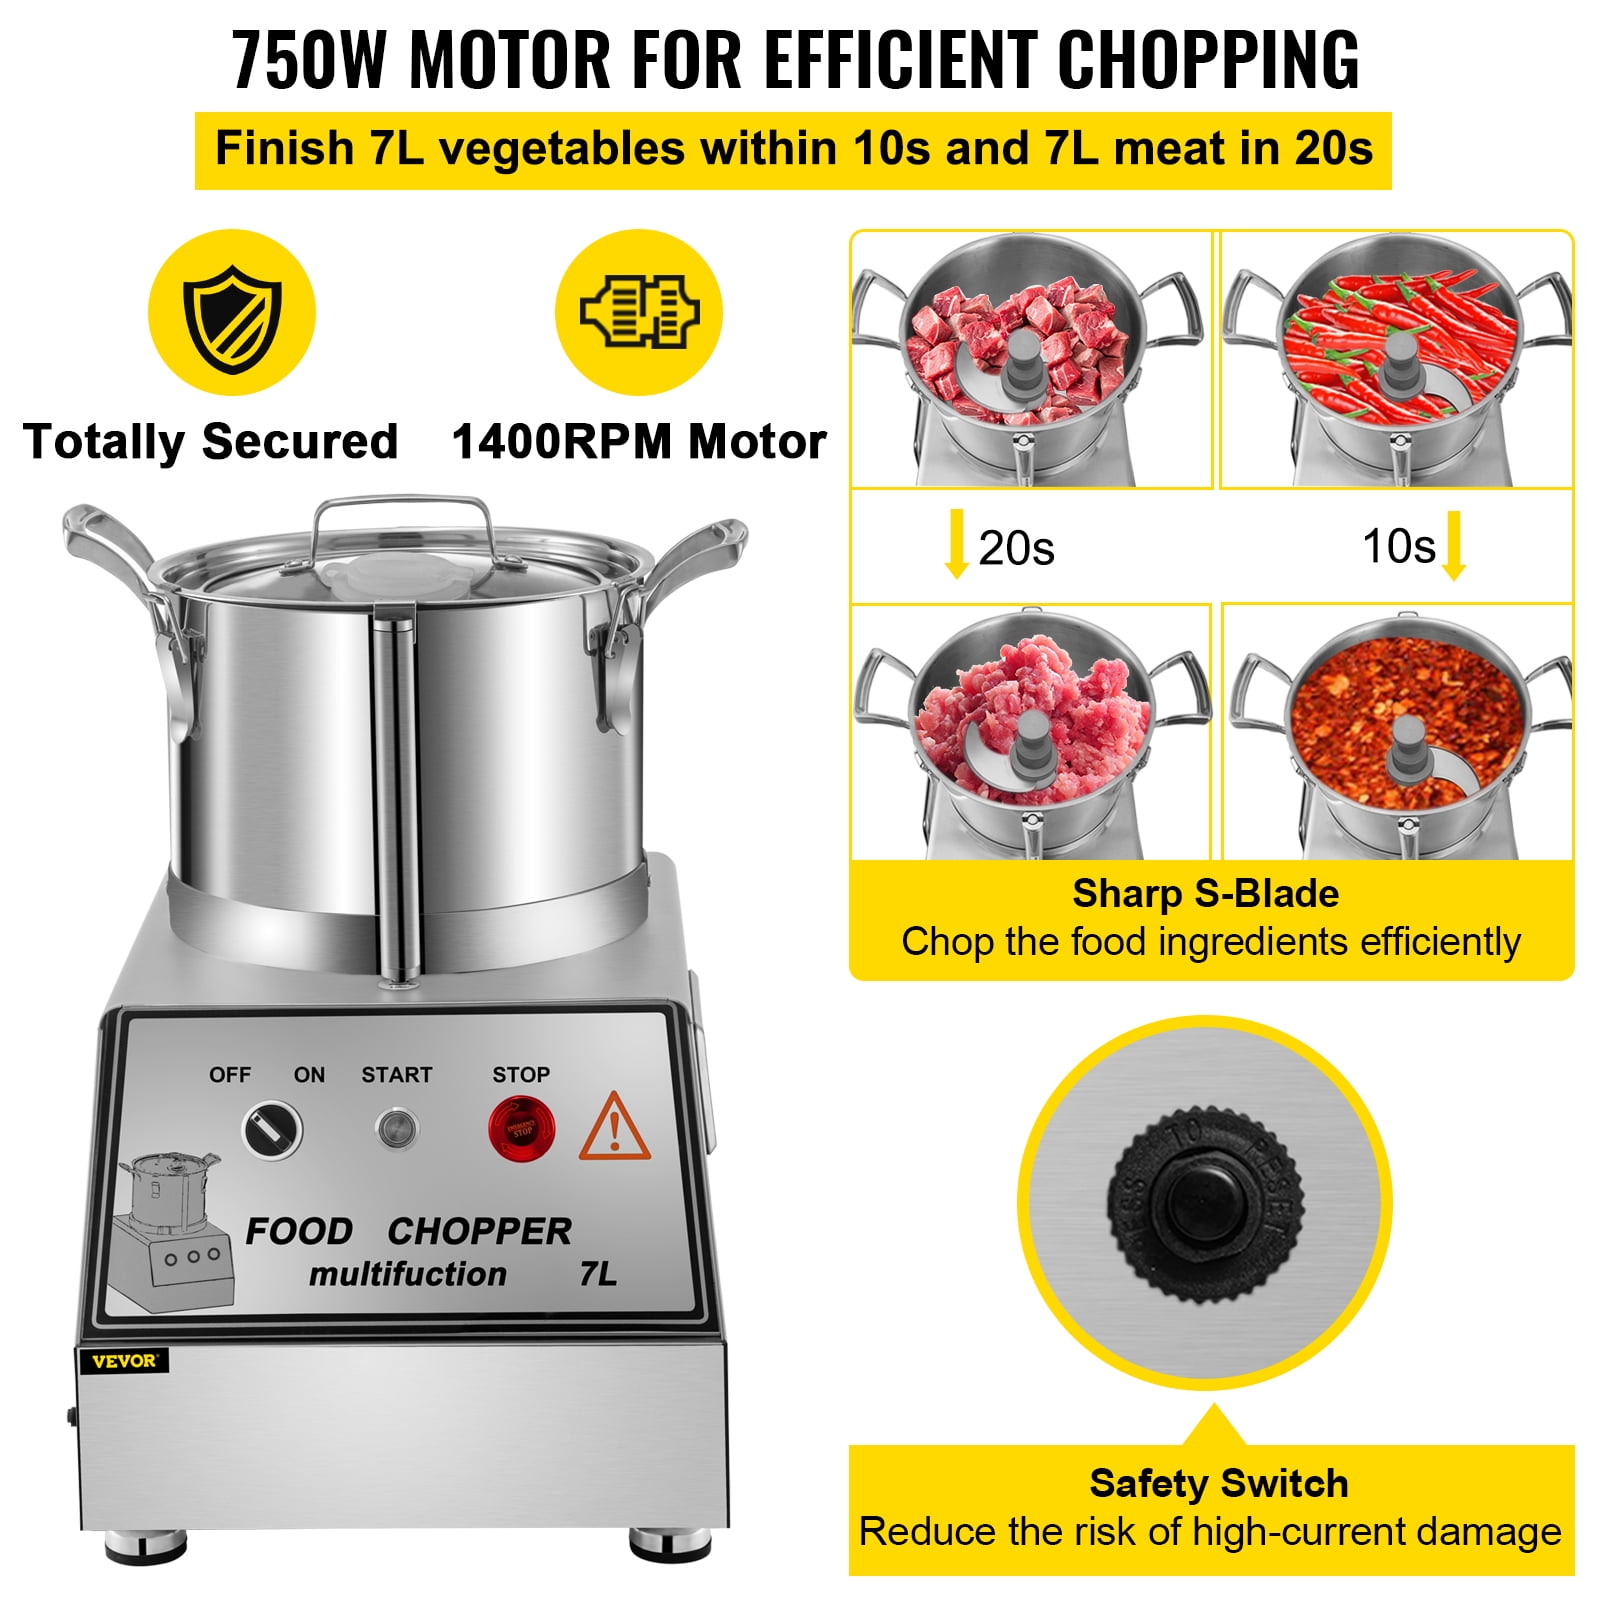 VEVOR Food Processor & Vegetable Chopper, 7 Quart Bowl, 750W Food-Grade  Stainless Steel Food Processor Chopper with 2 Extra S-Curve Blades,  Multifunctional for Chopping Vegetables, Meat, Grains, Nuts